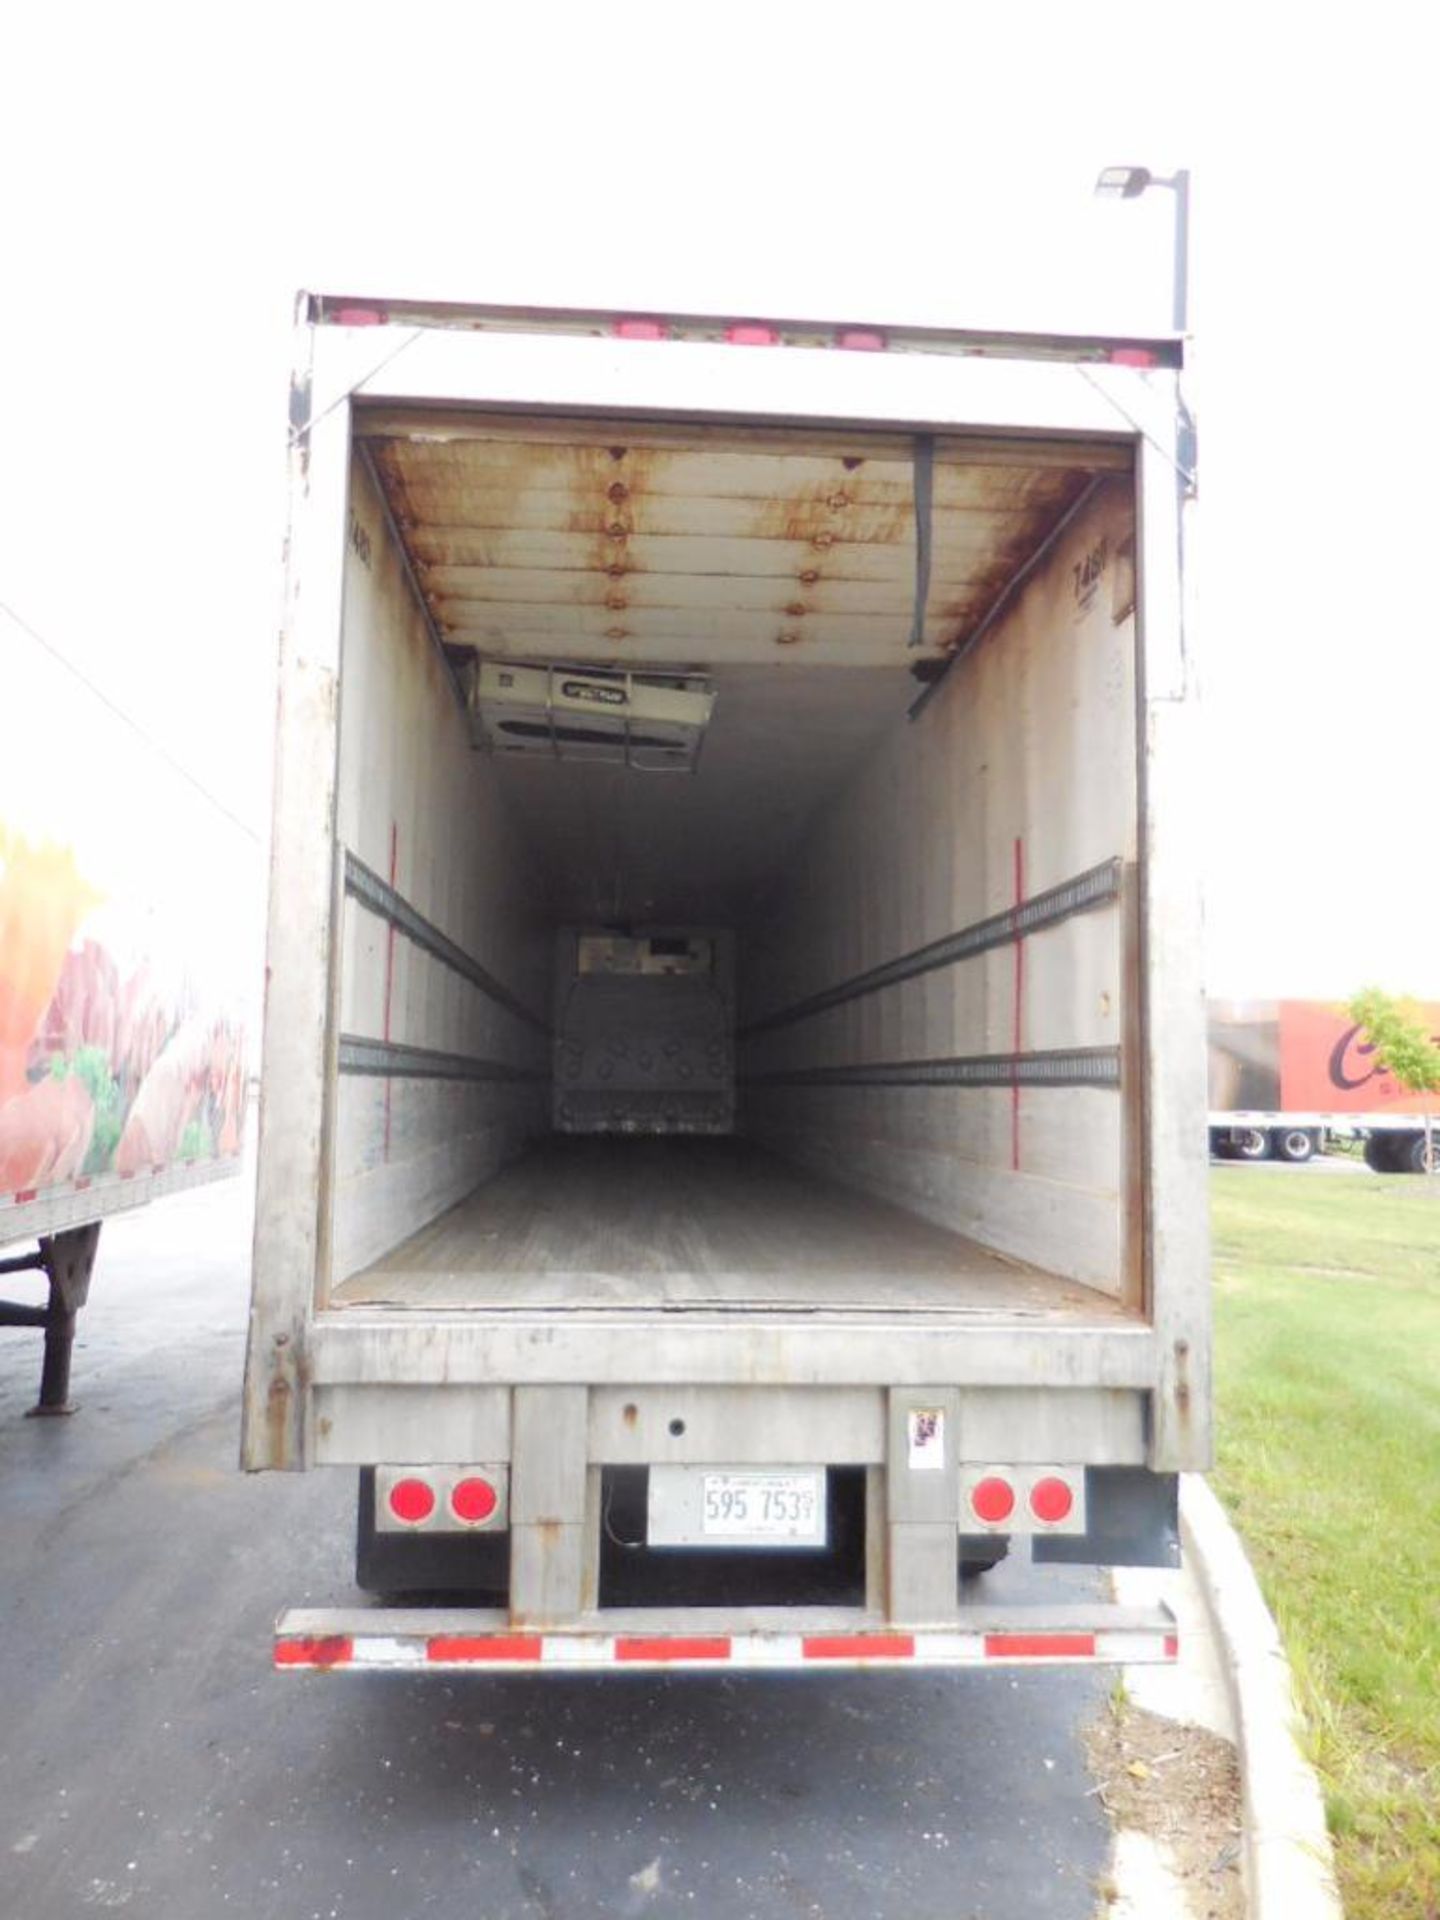 2004 Great Dane 48' Refrigerated Trailer, VIN # 1GRAA96275B703742, Unit 74811 - Image 4 of 22